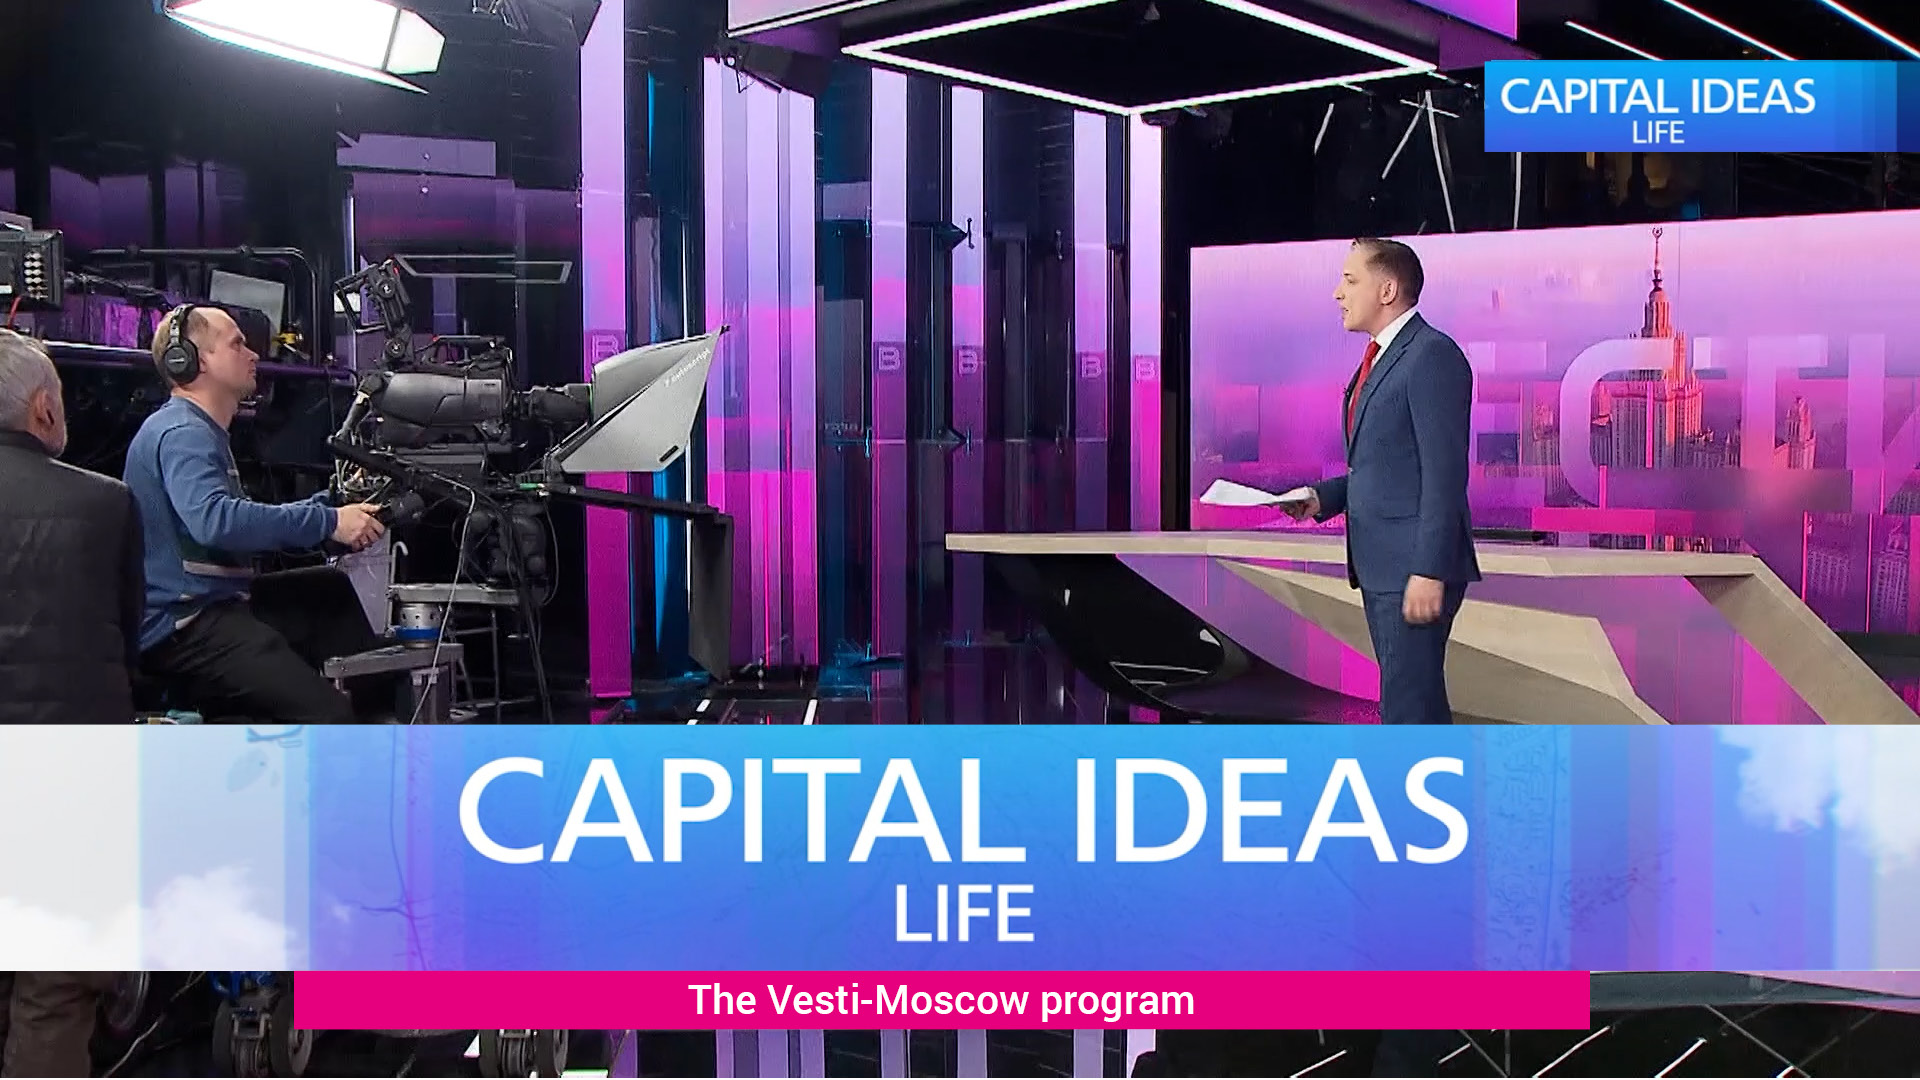 "Capital ideas Life". We are going to visit the Vesti-Moscow program.